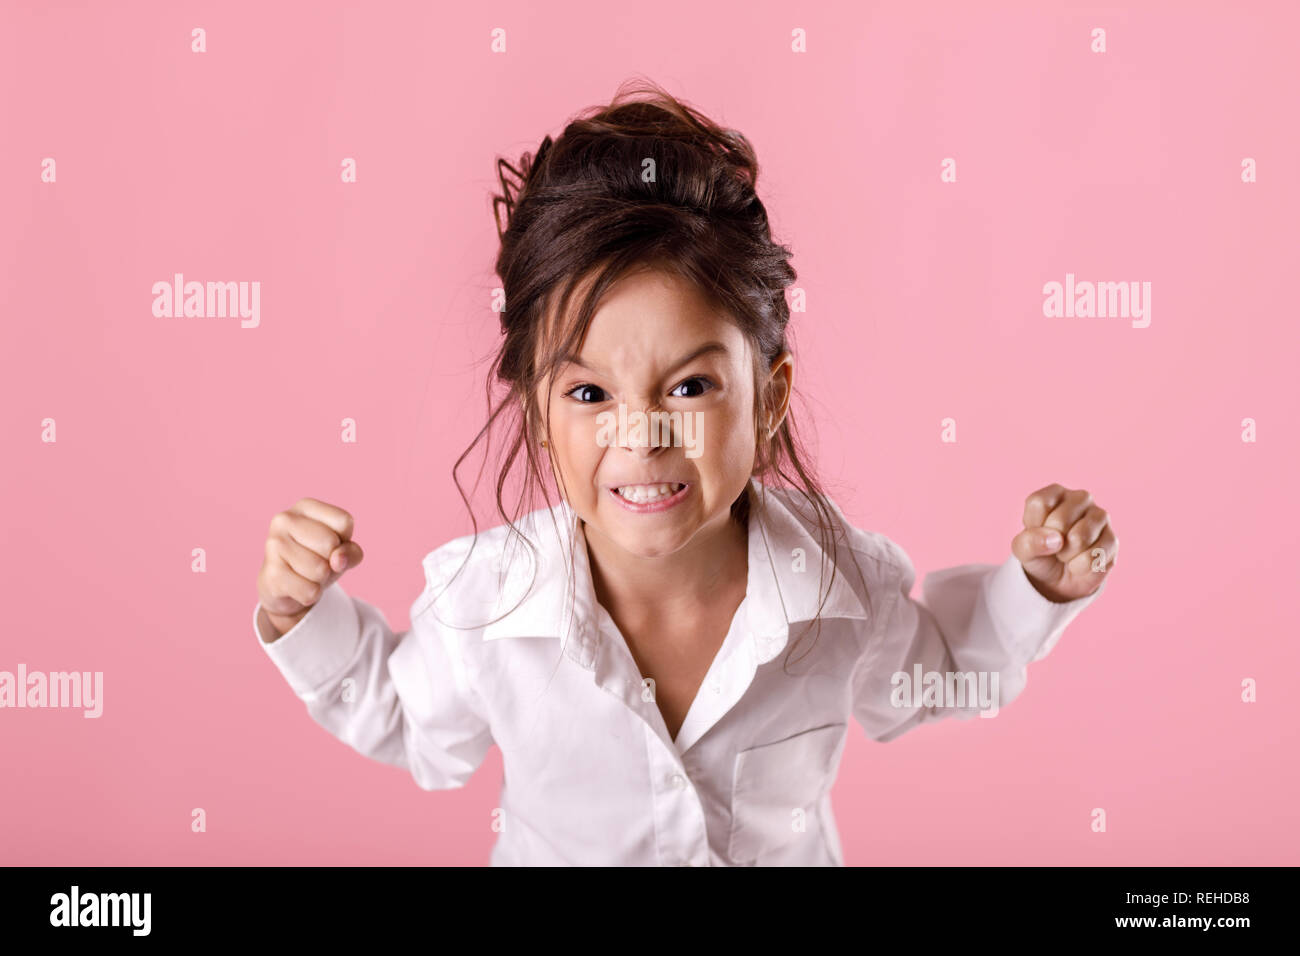 angry little child girl in white shirt with hairstyle Stock Photo - Alamy